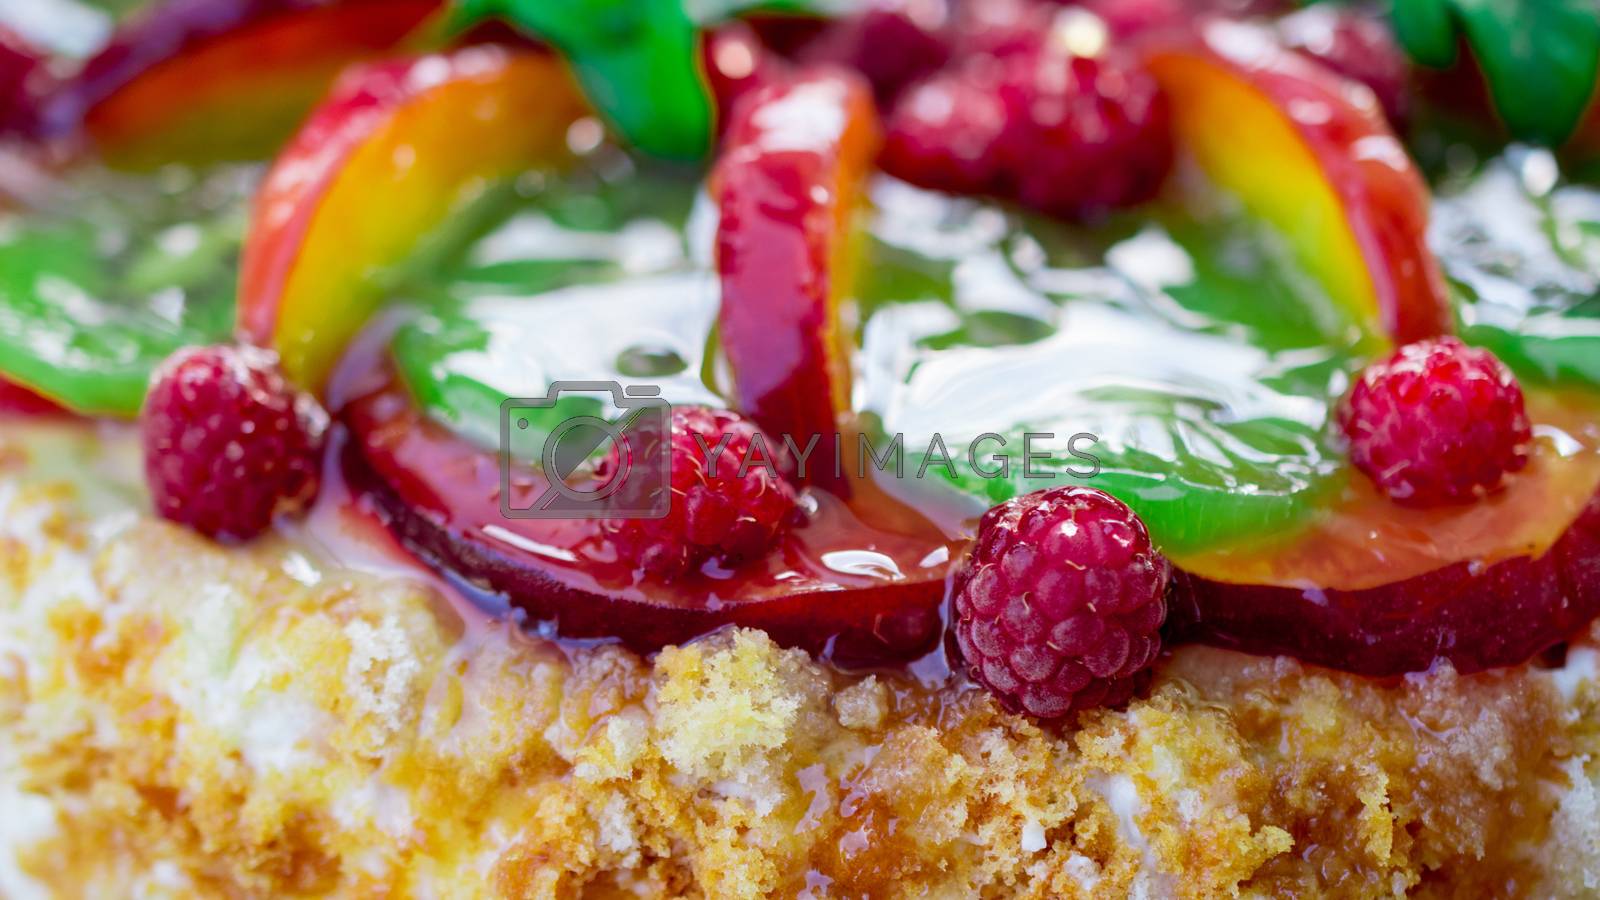 Royalty free image of fragment of cake with raspberry, kiwi and jelly by alexandr_sorokin